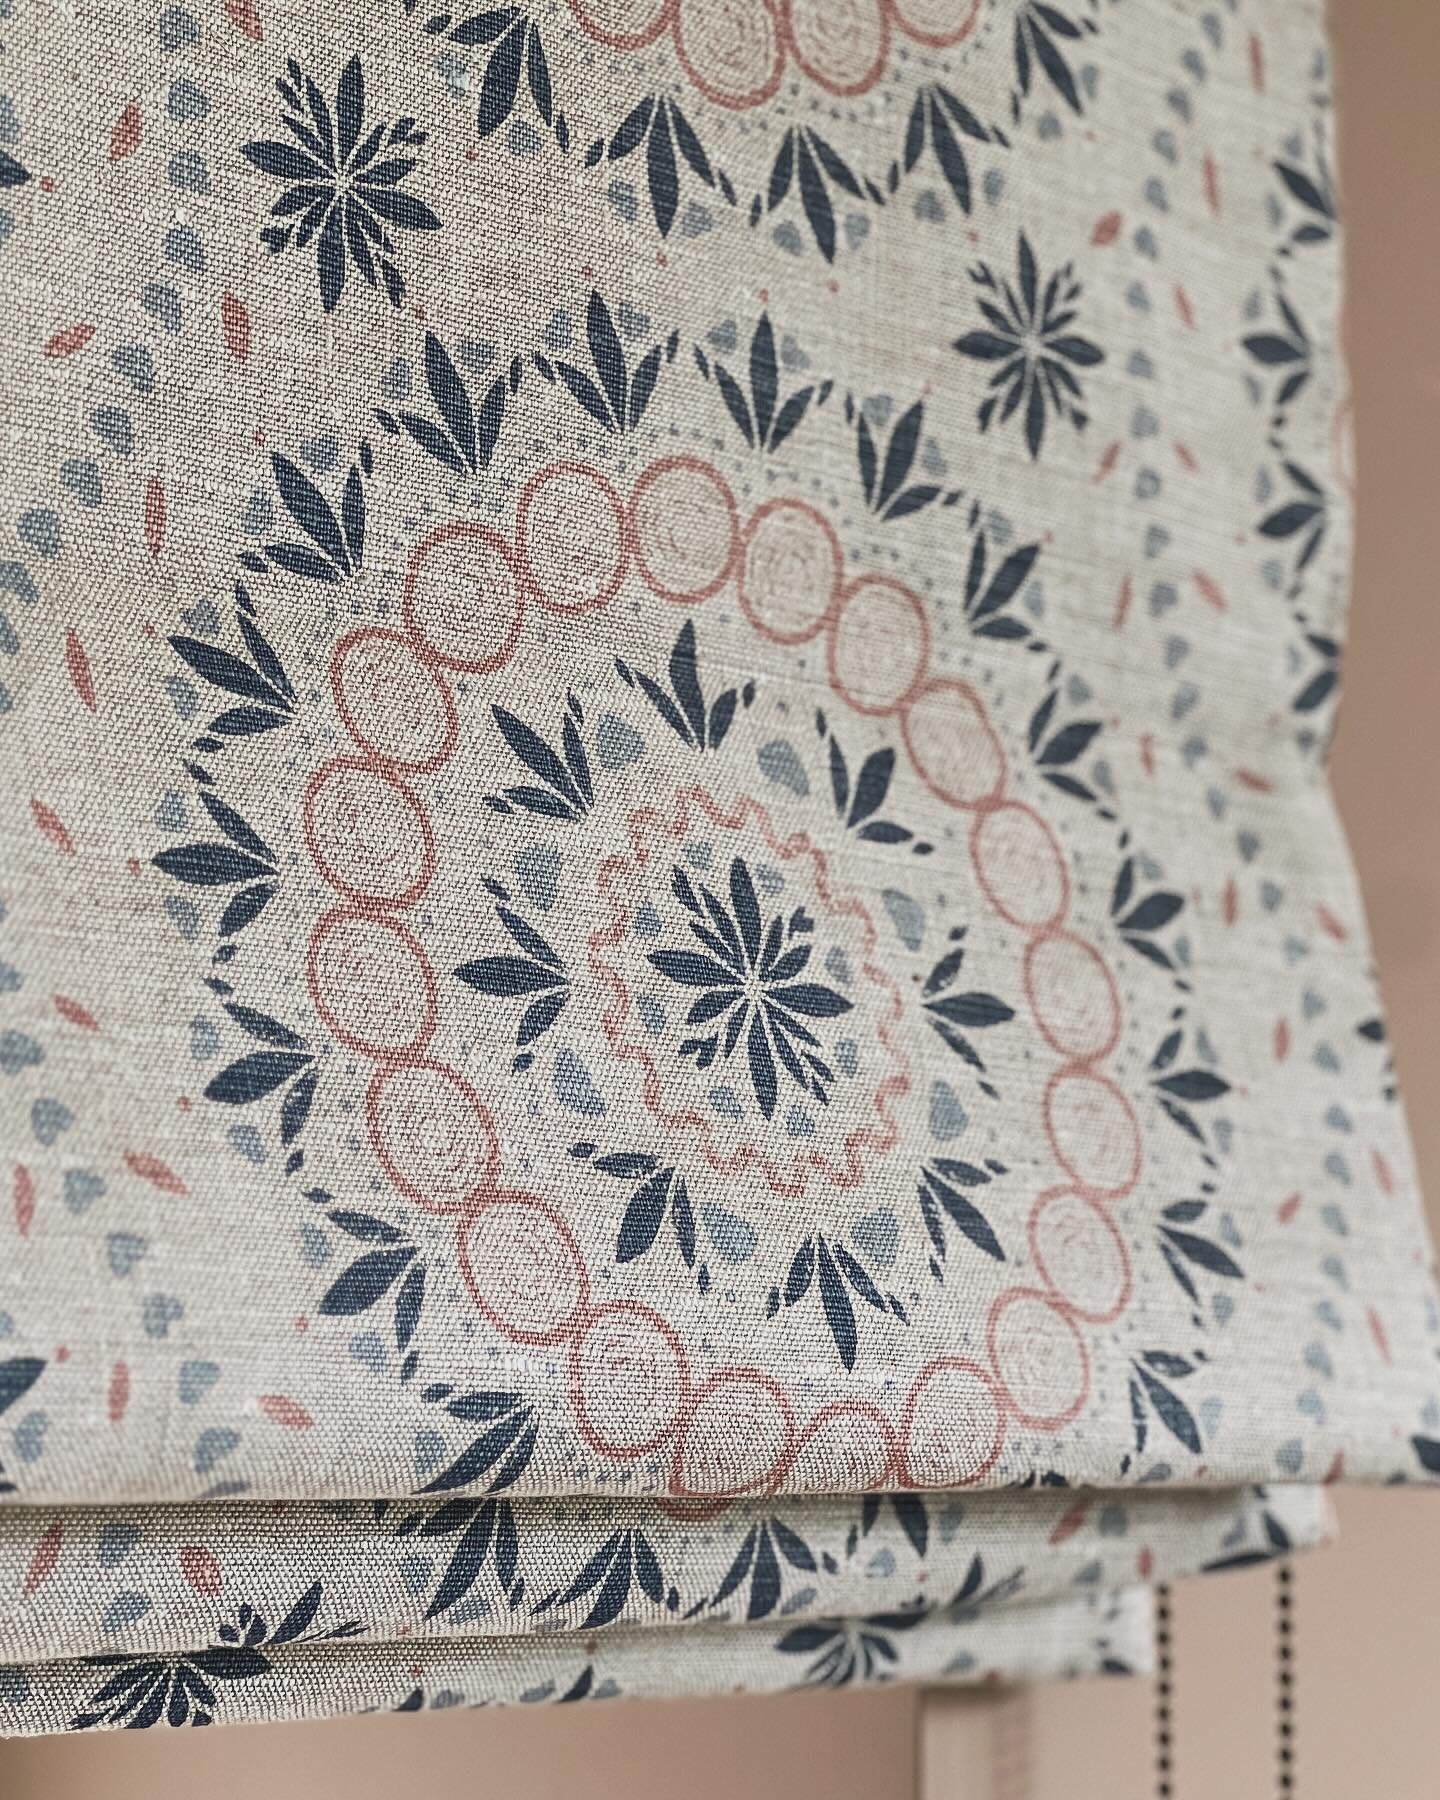 We love how pattern and colour can welcome you home, creating a connection that&rsquo;s more than just about bricks and mortar. 

Adding blinds, curtains or just a lampshade in your favourite print builds layers of character. 

Fabric featured: Palma